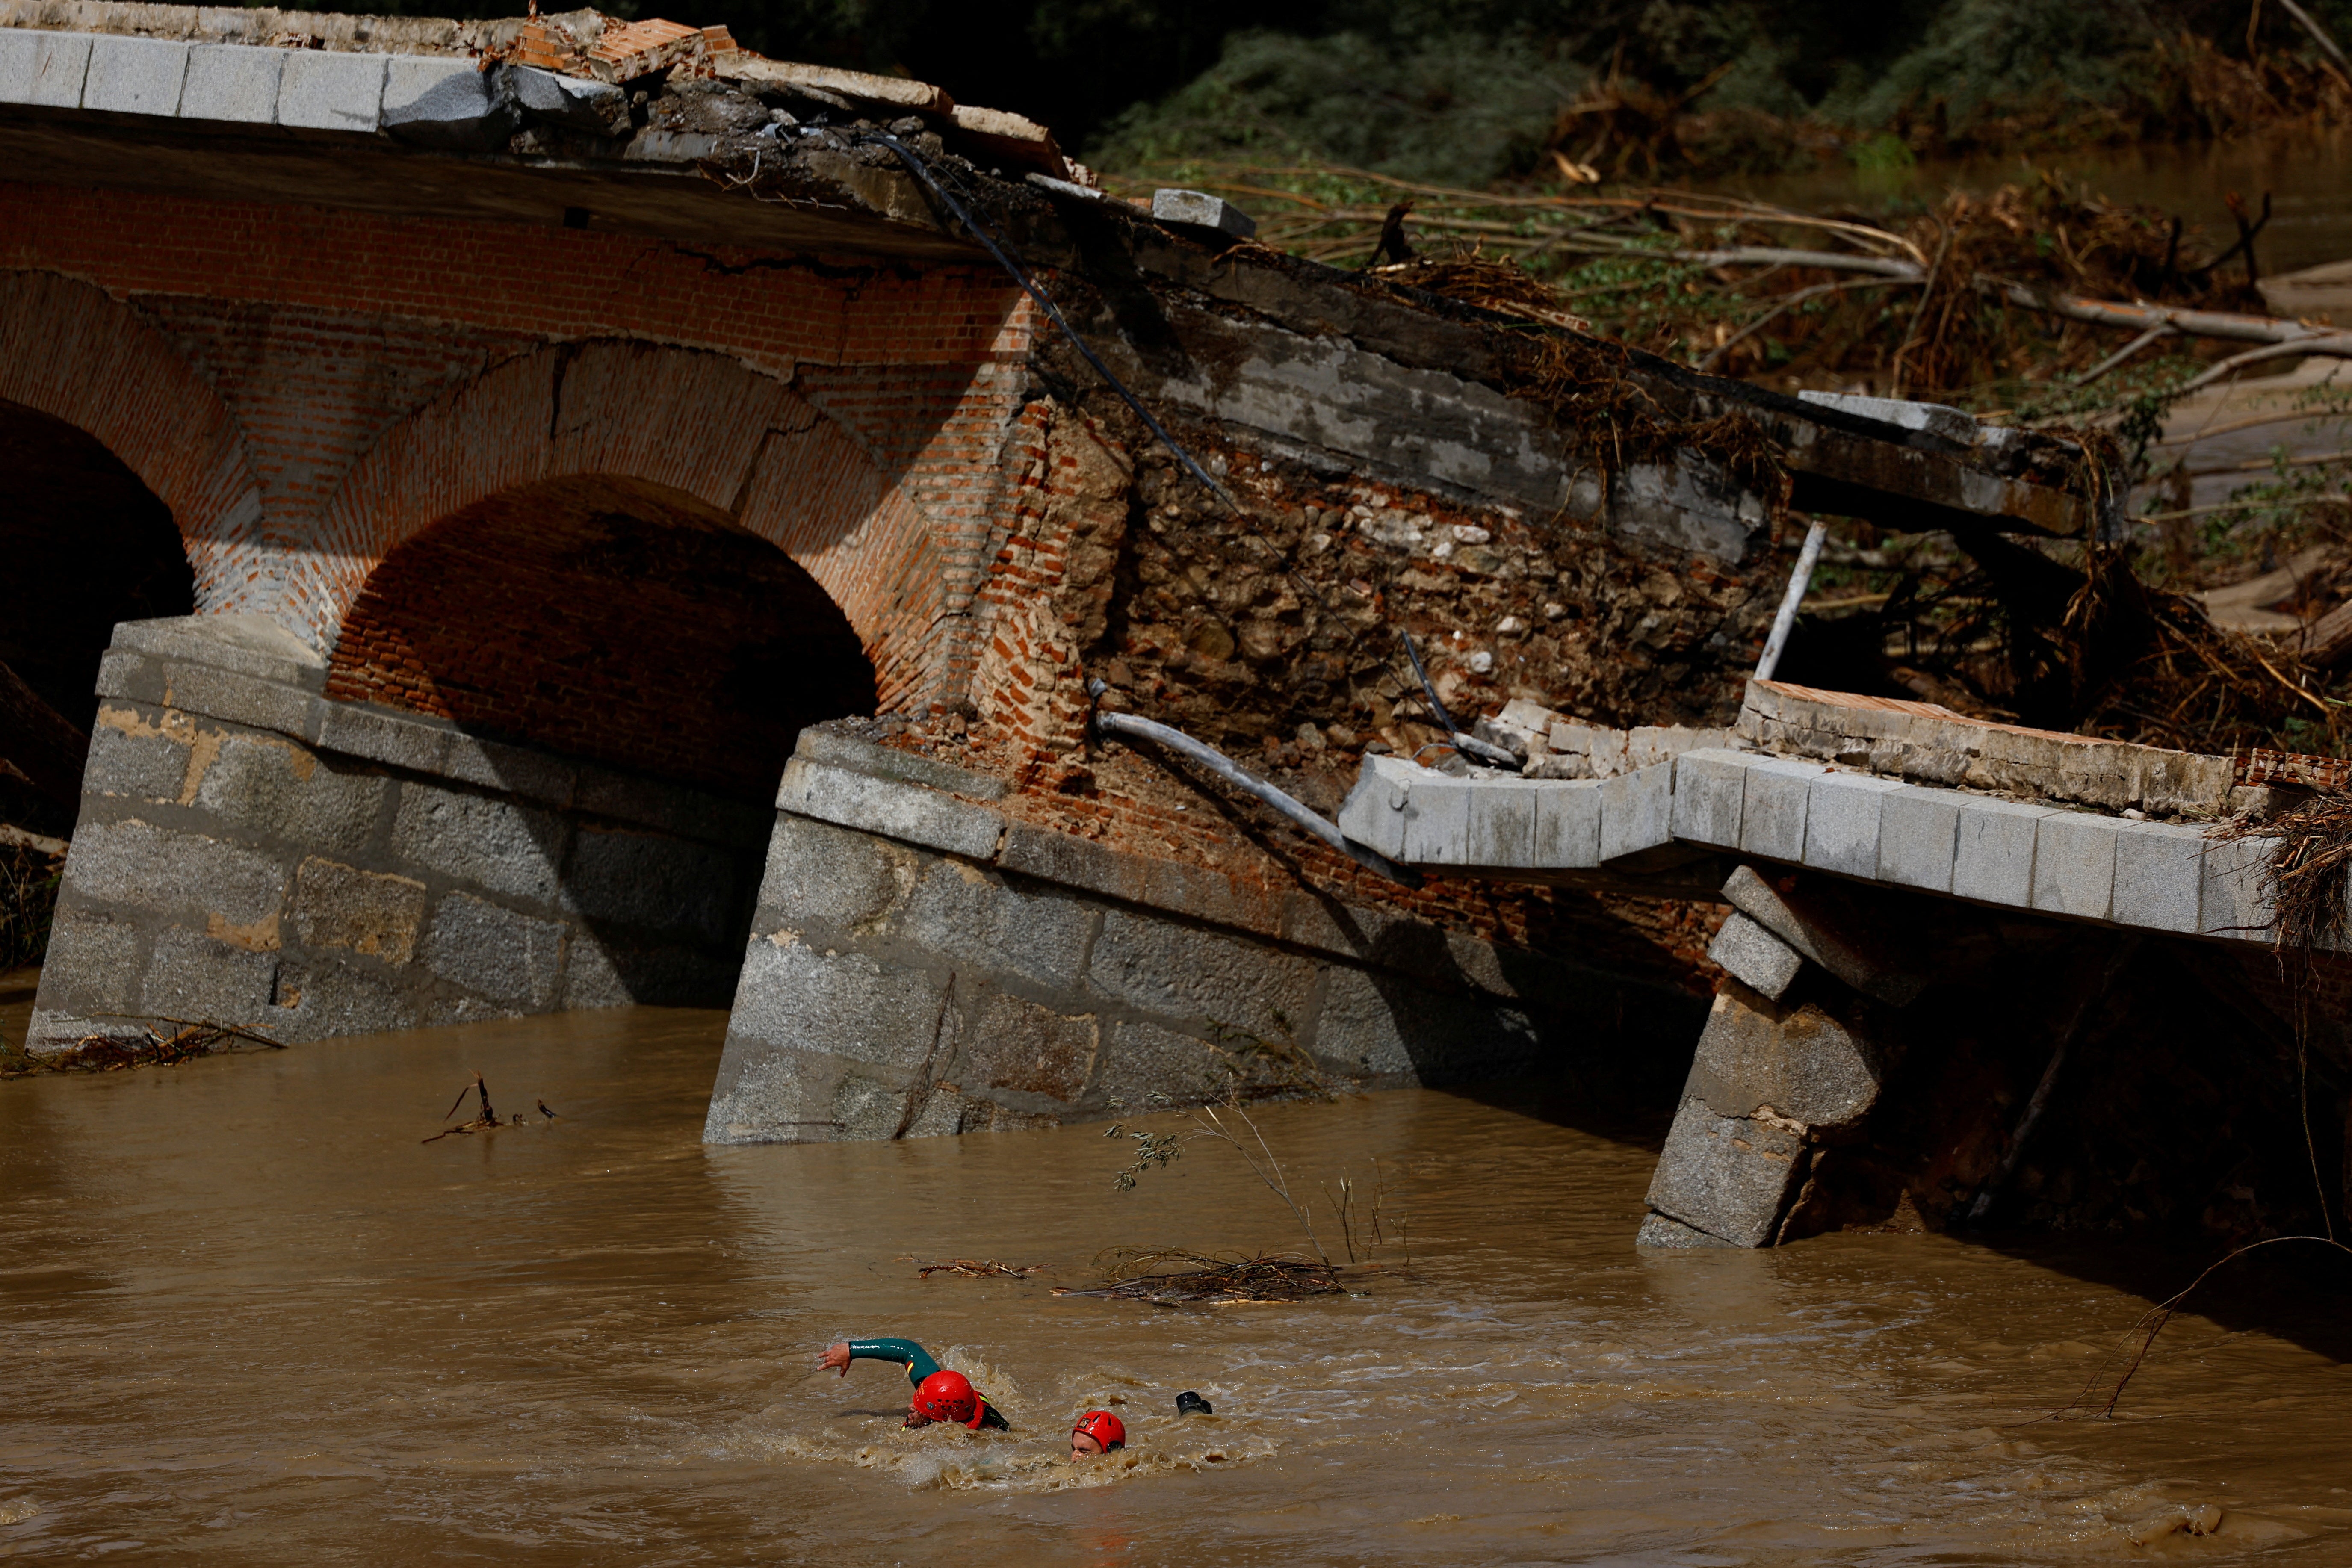 Rescuers search for a missing man in Aldea del Fresno, Spain on Monday